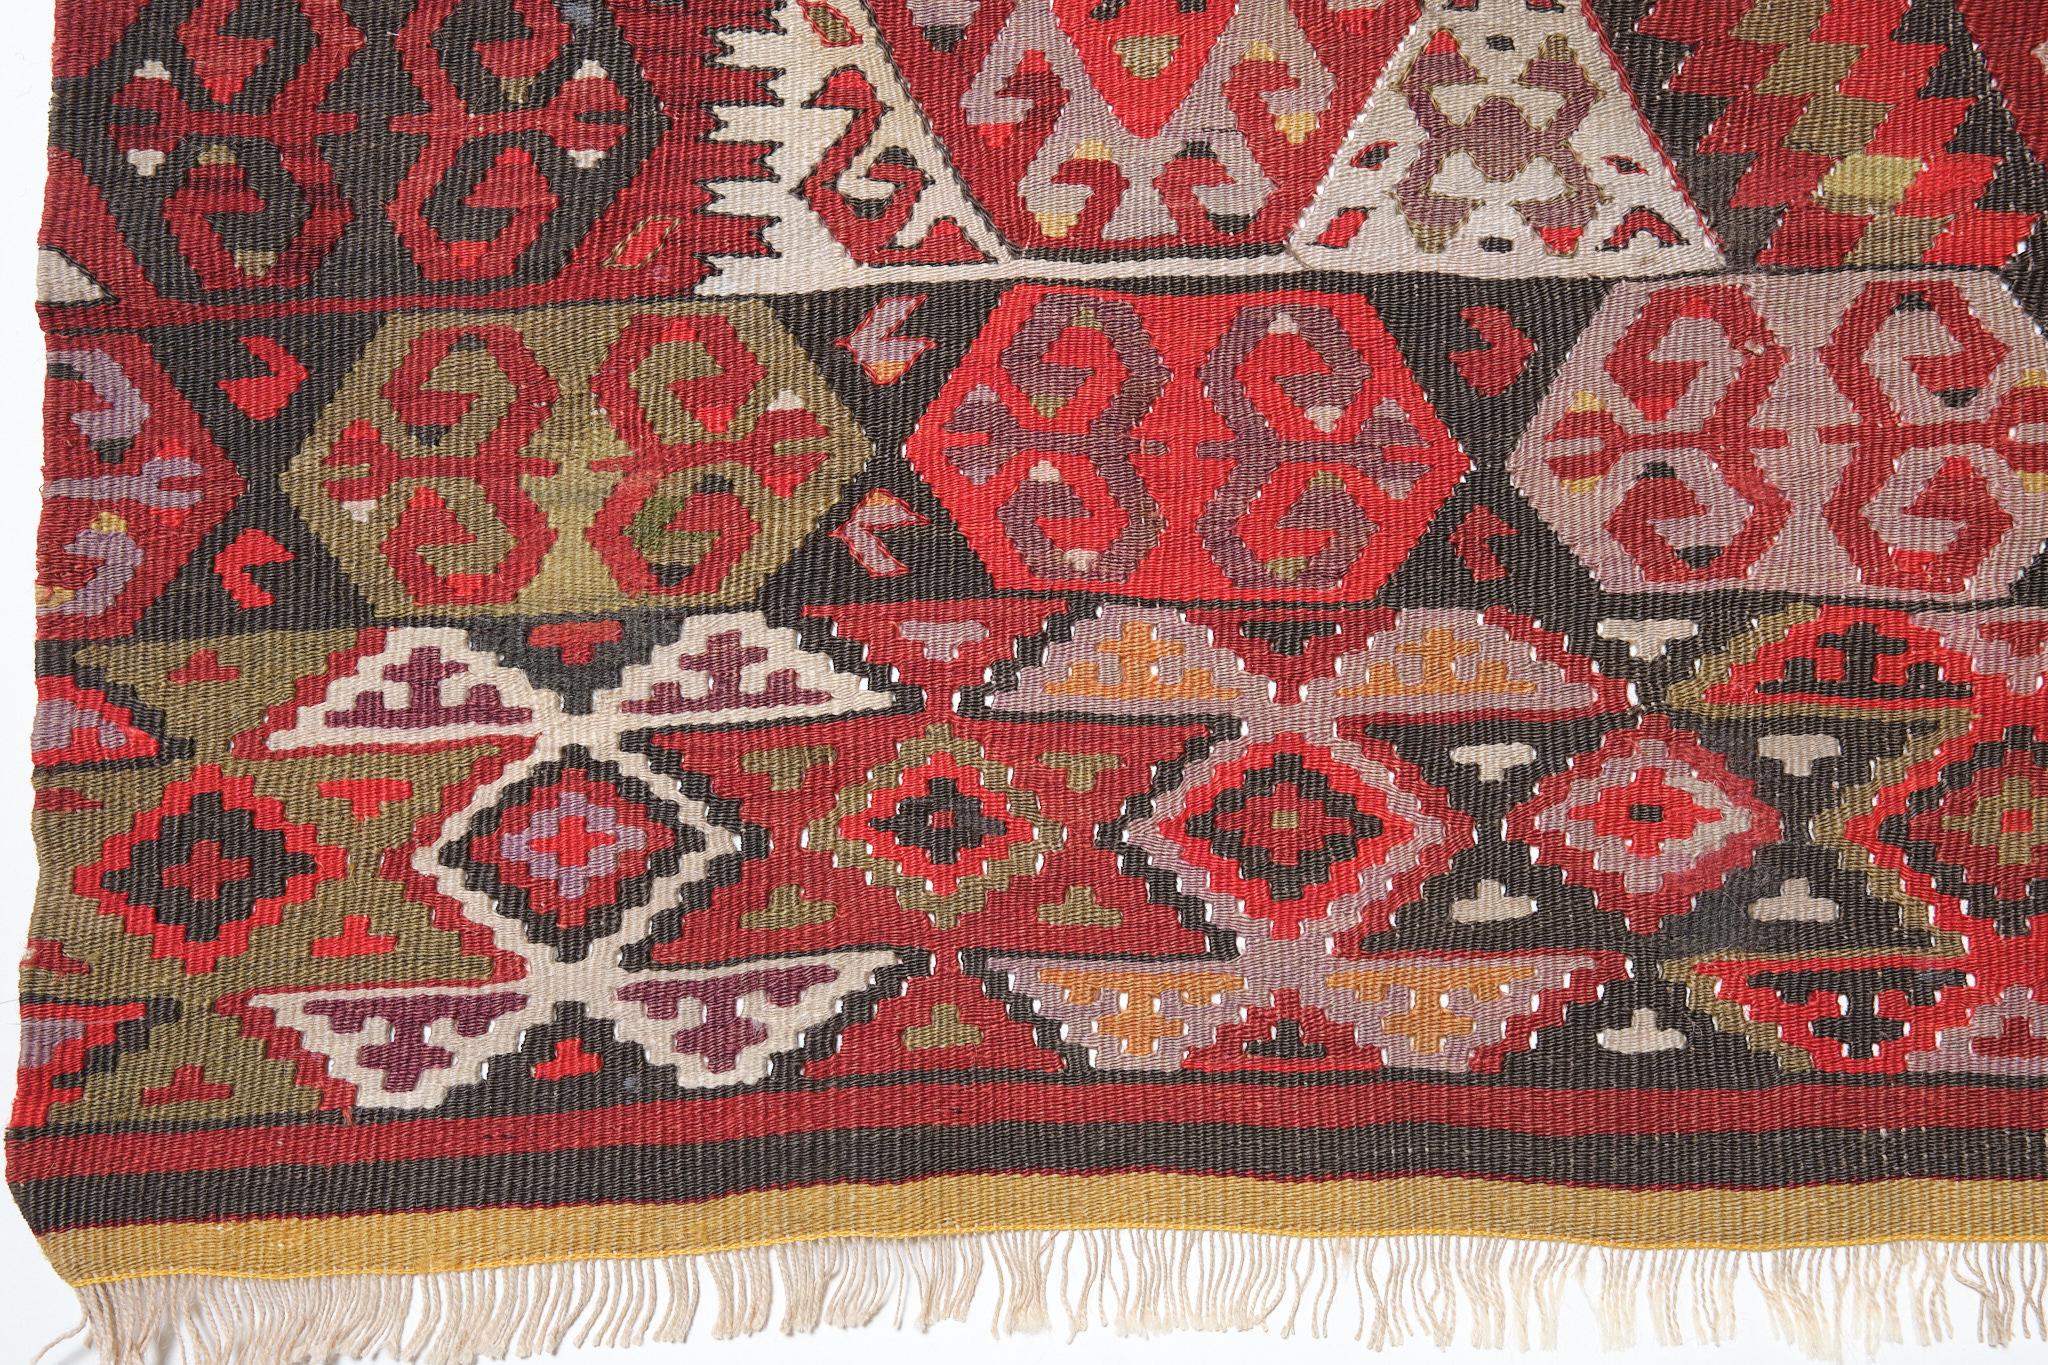 This is an old Western Anatolian Kilim from the Fethiye region with a red background and beautiful color composition.

The borders, medallions, and fields are densely woven with patterns. There are few rough edges, and it is a polite job. Red is